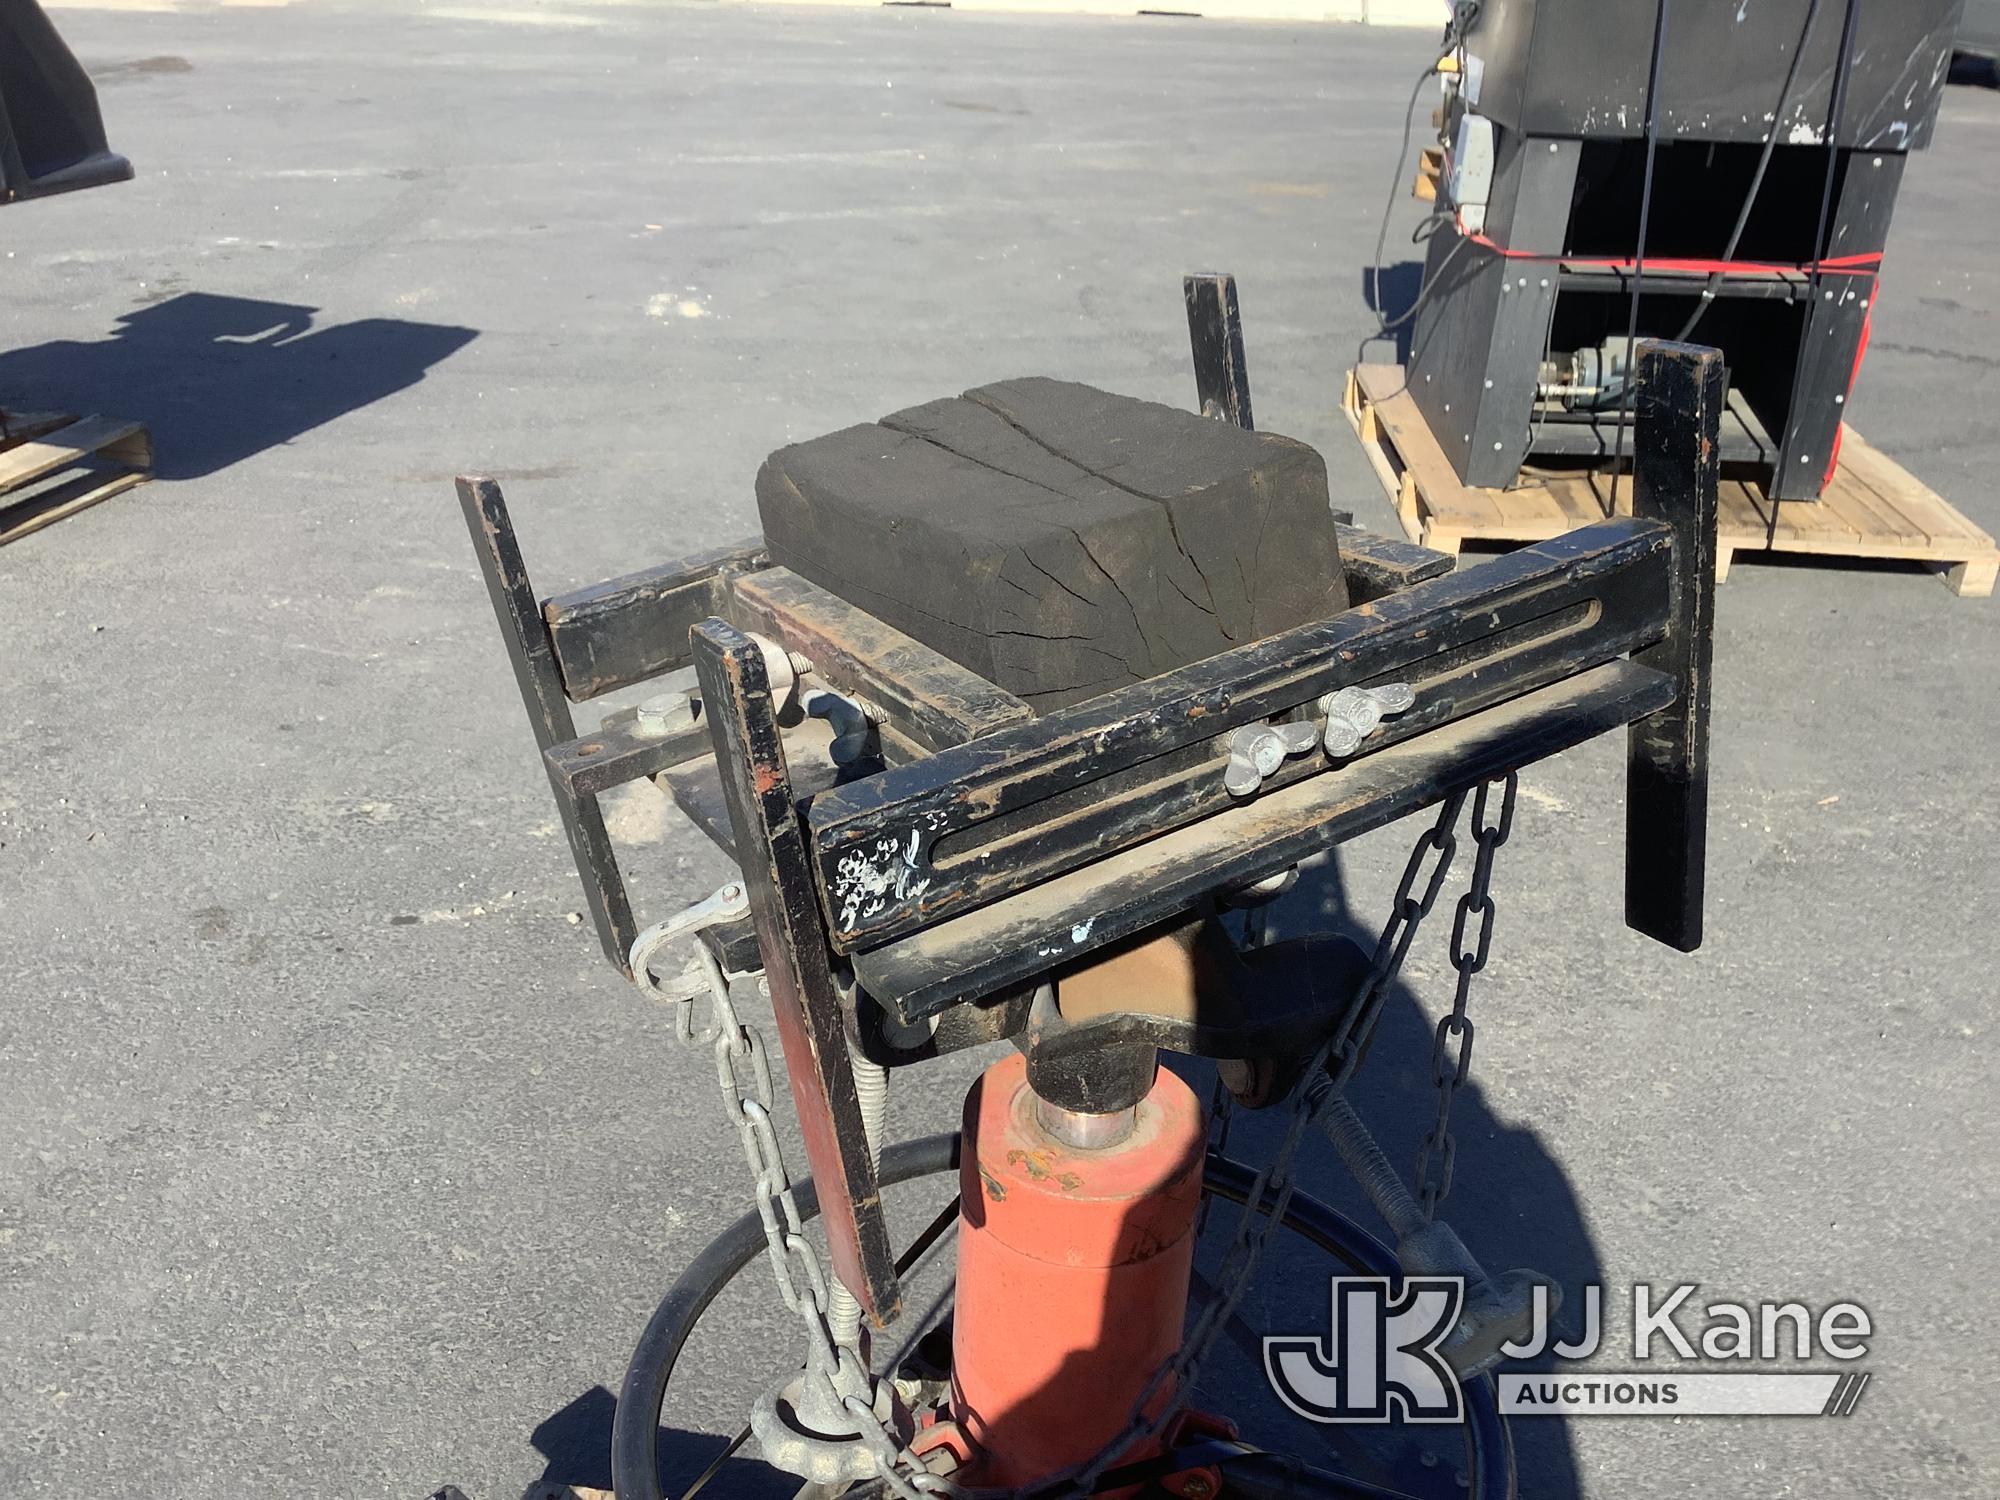 (Jurupa Valley, CA) 1 Transmission Jack (Used) NOTE: This unit is being sold AS IS/WHERE IS via Time